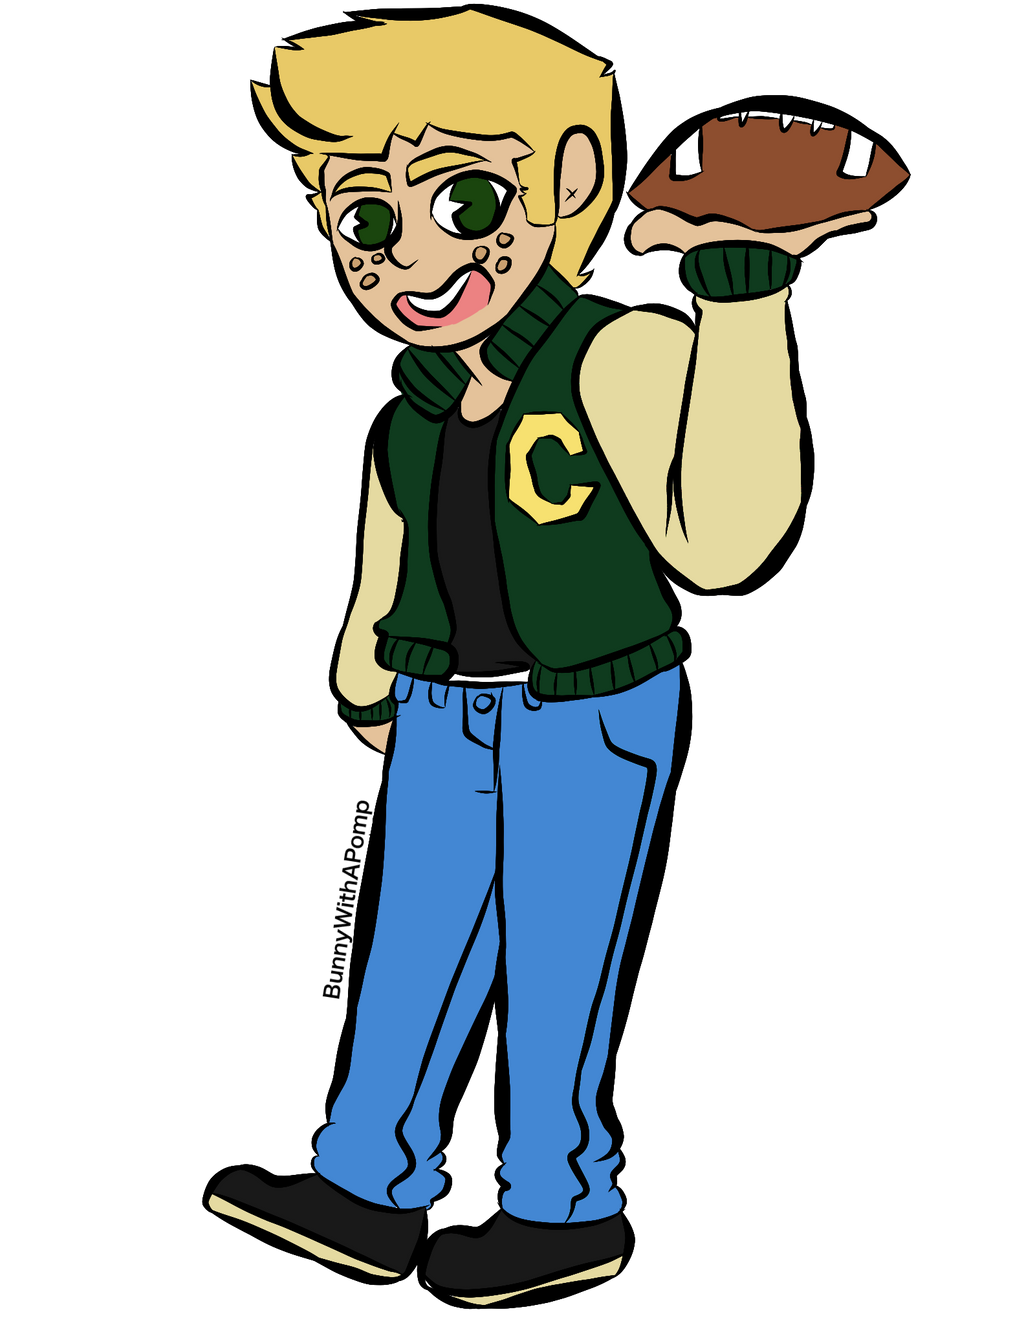 chet_chibi_by_bunnywithapomp-dcjhrba.png